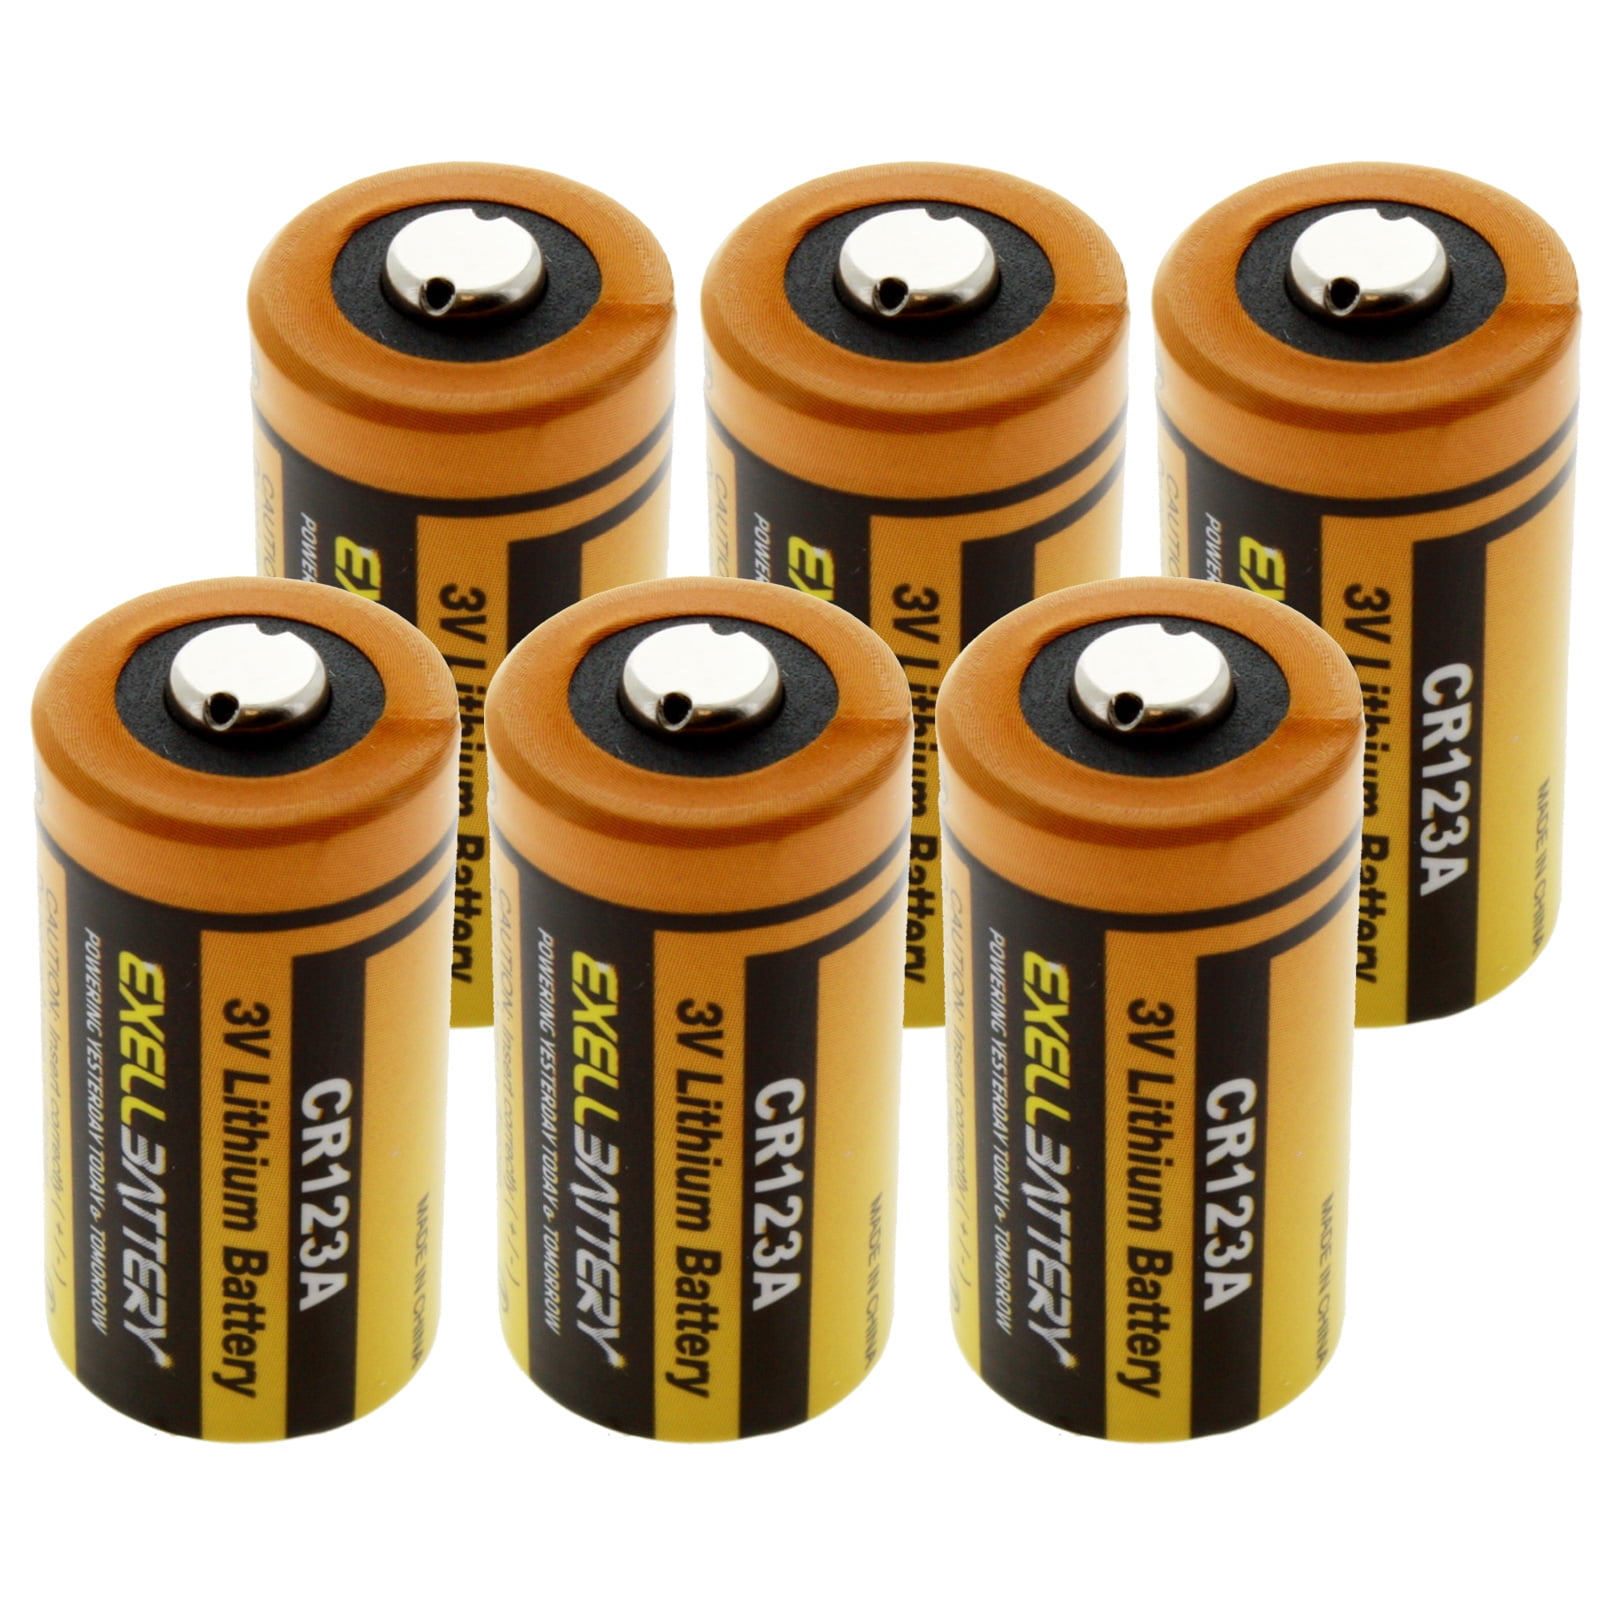 EEMB 4PACK CR123A Lithium Batteries 3V 1700mAh CR123 Battery with High  Capacity for Flashlight Toys Alarm System Non-Rechargeable Battery